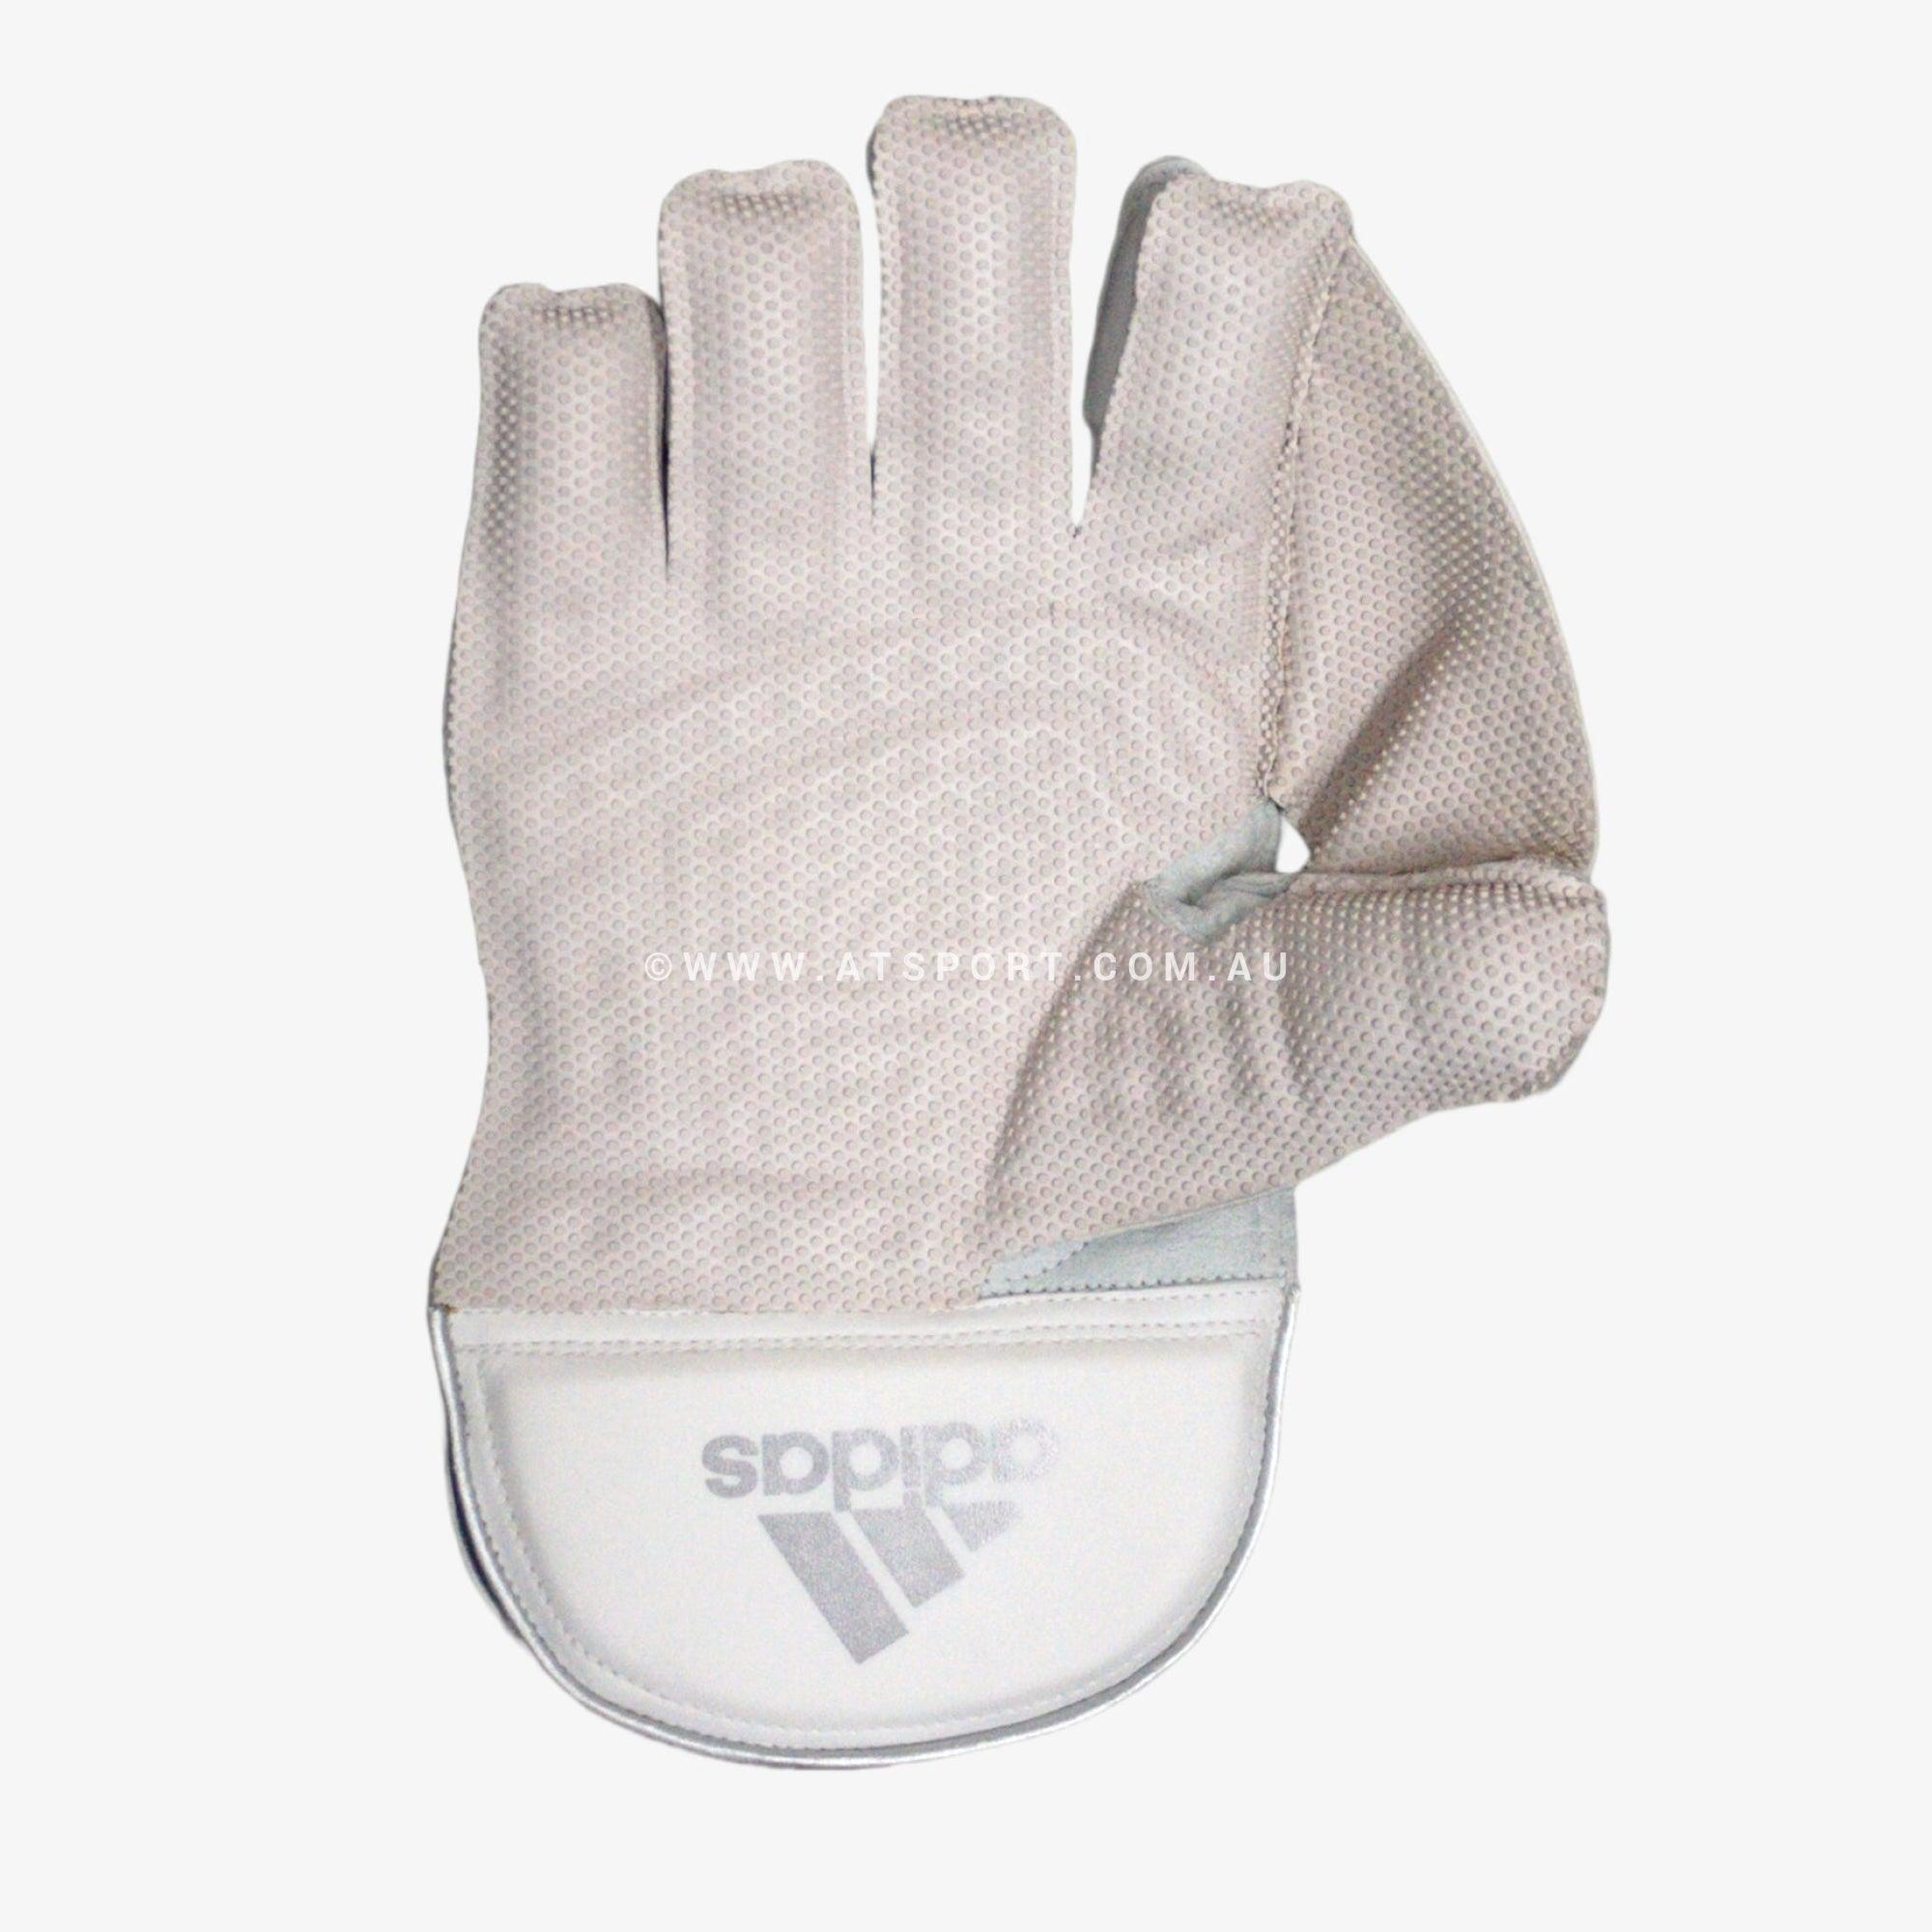 Adidas XT 1.0 Wicket Keeping Gloves - ADULT - AT Sports